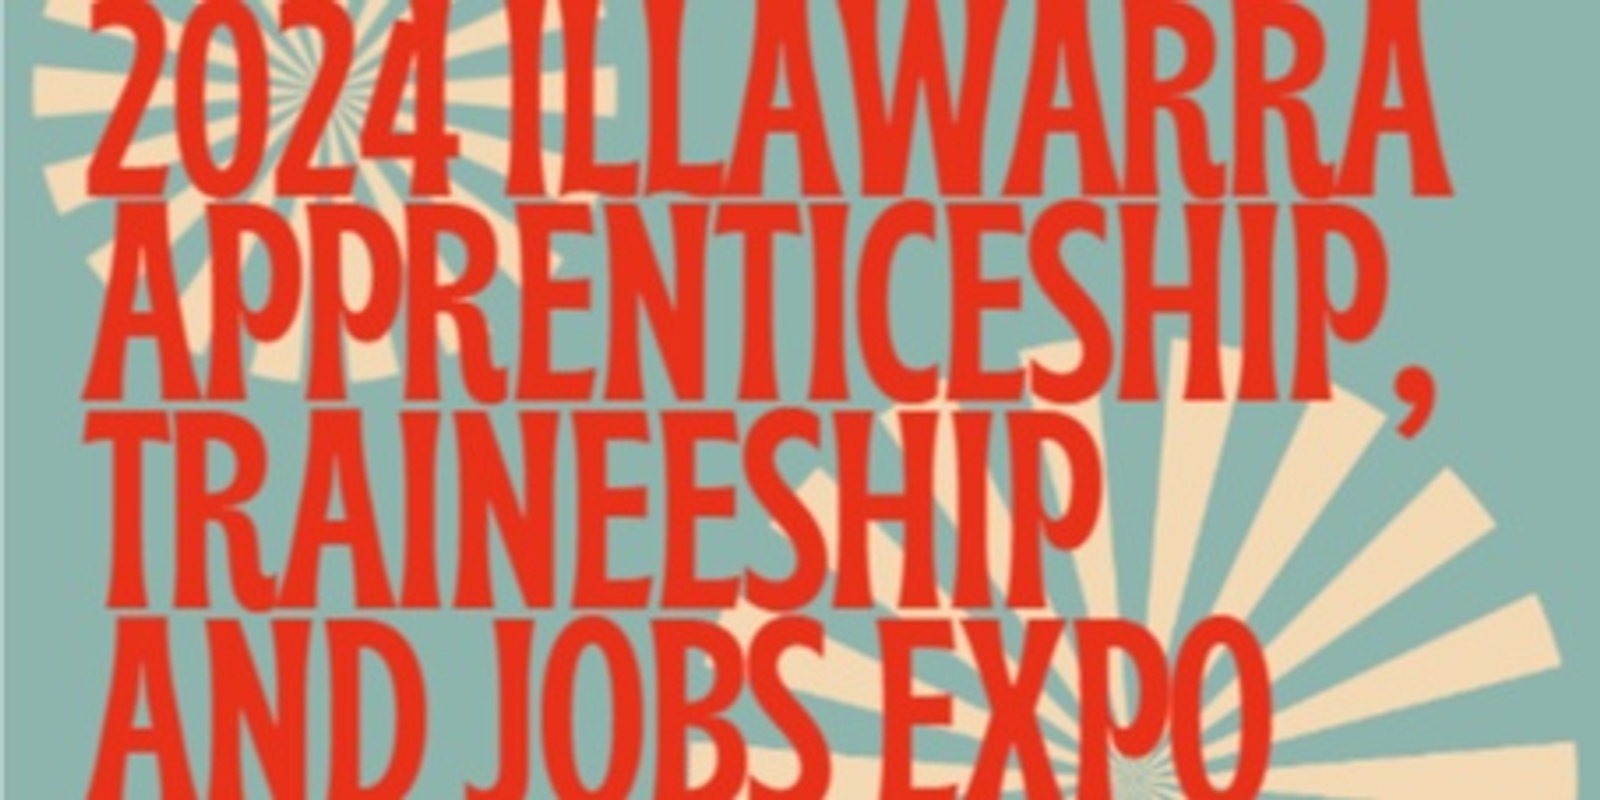 Banner image for Get a Job South Coast Illawarra Apprenticeship, Traineeship & Jobs Expo Look and Learn 